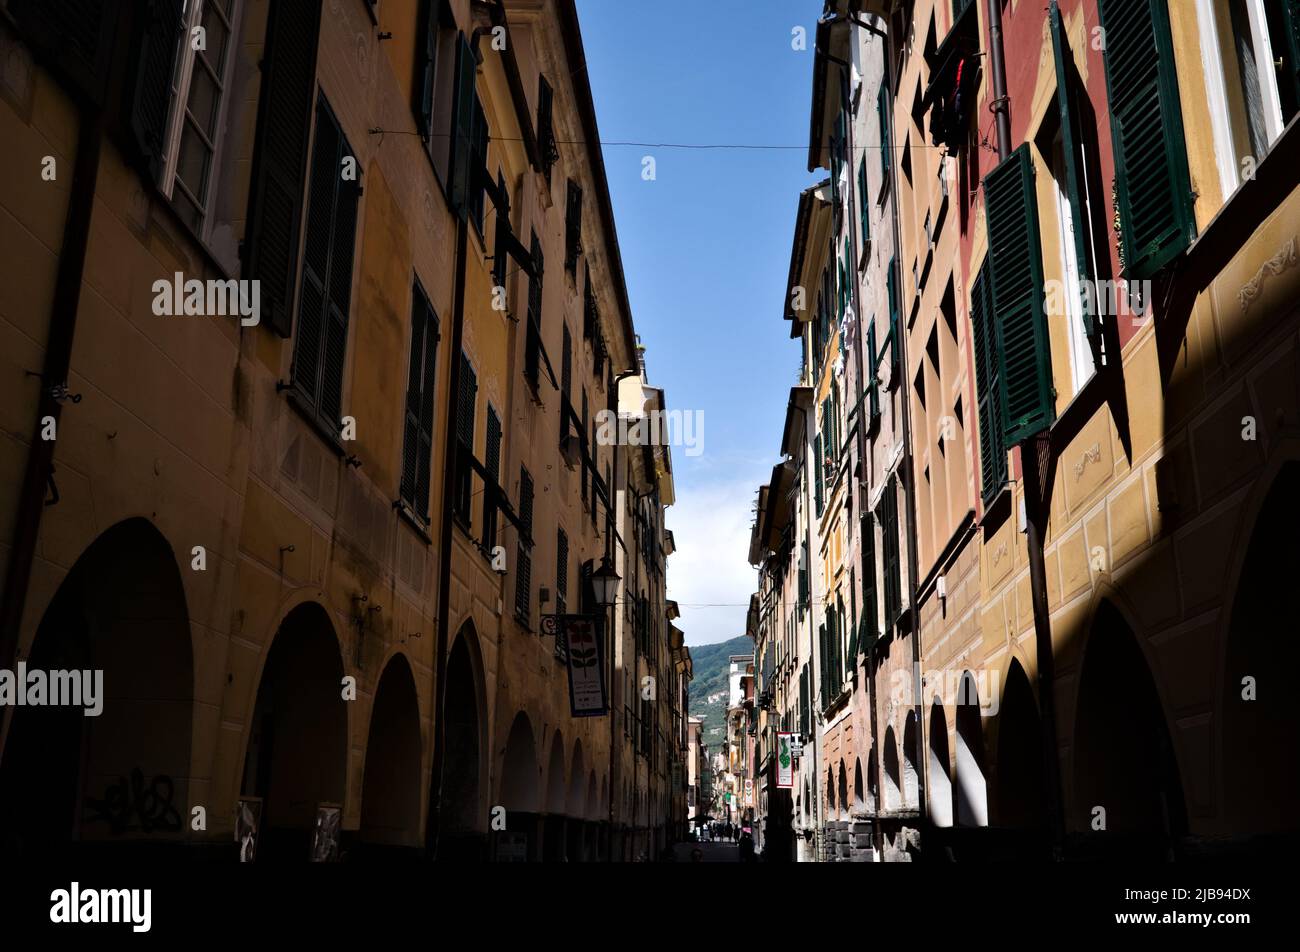 Chiavari, Italy - May, 2022: Narrow street with typical Italian buildings with wooden shutters on windows. Streak of blue sky between two buildings Stock Photo